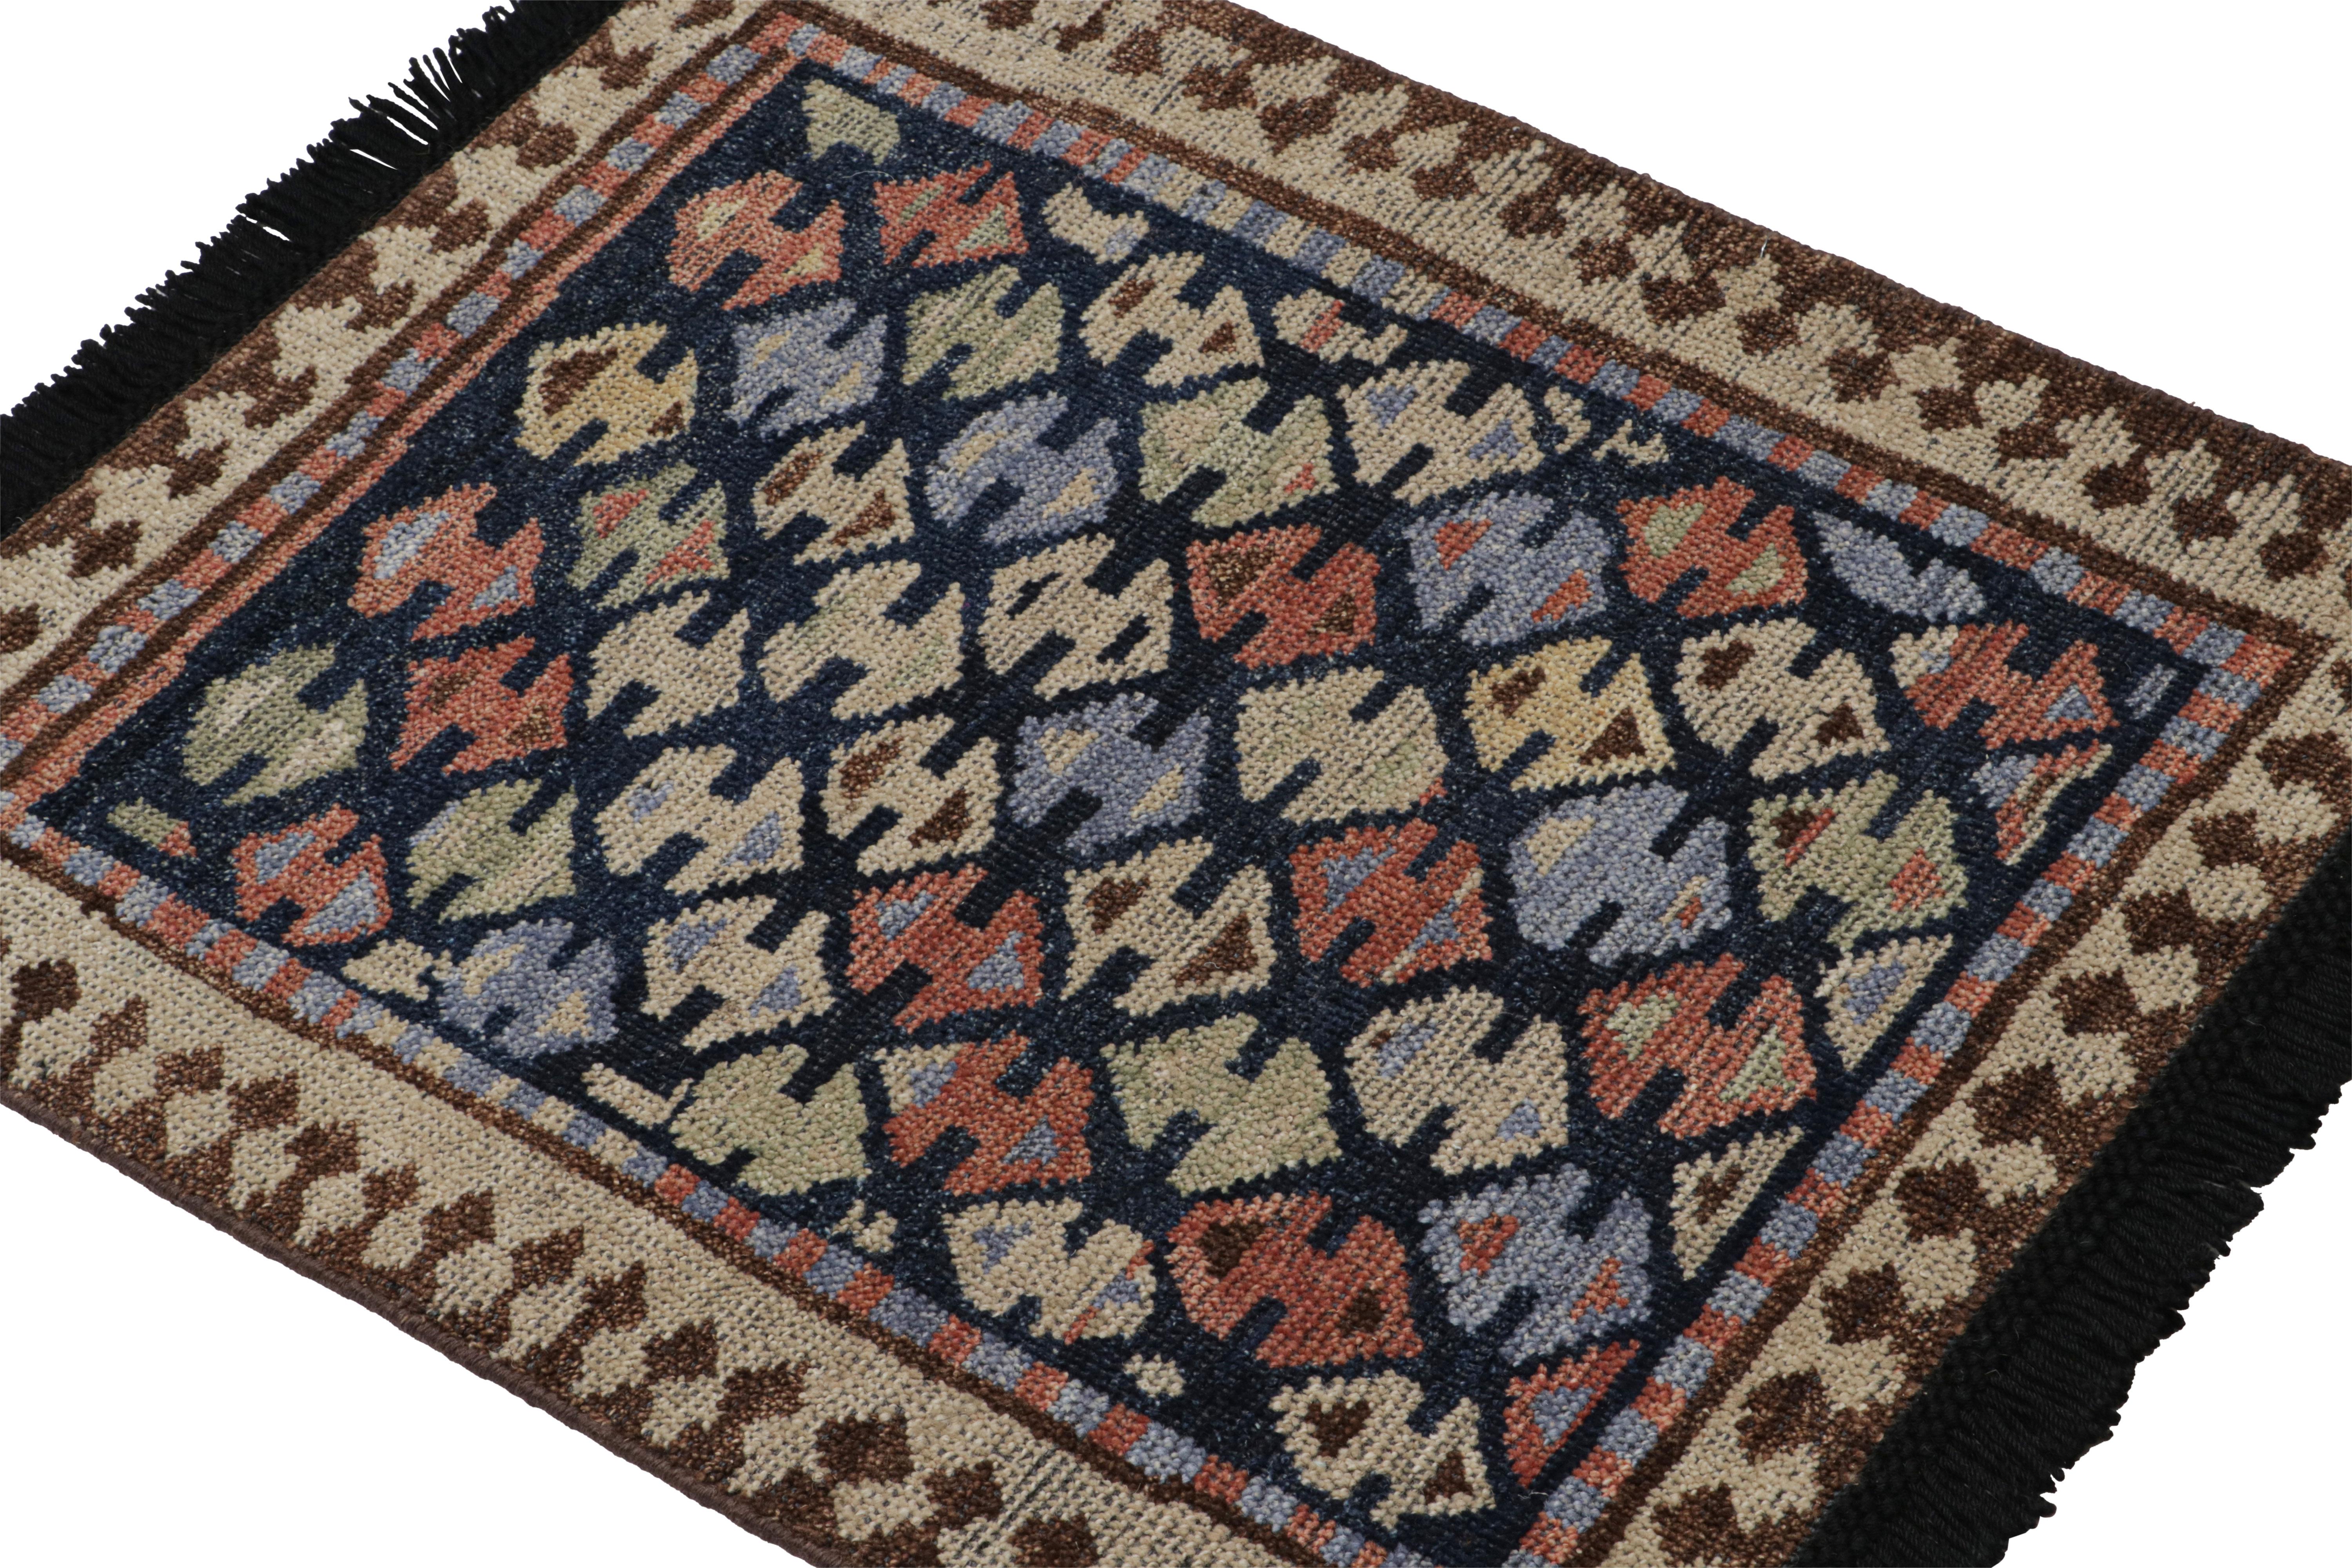 Inspired by Turkish rug and Kilims with double-sided arrow motif “Bukagi” geometric patterns, this 2x3 piece from Rug & Kilim’s Burano collection is hand-knotted in wool. 

On the Design: 

Connoisseurs will admire that this rug enjoys an archaic